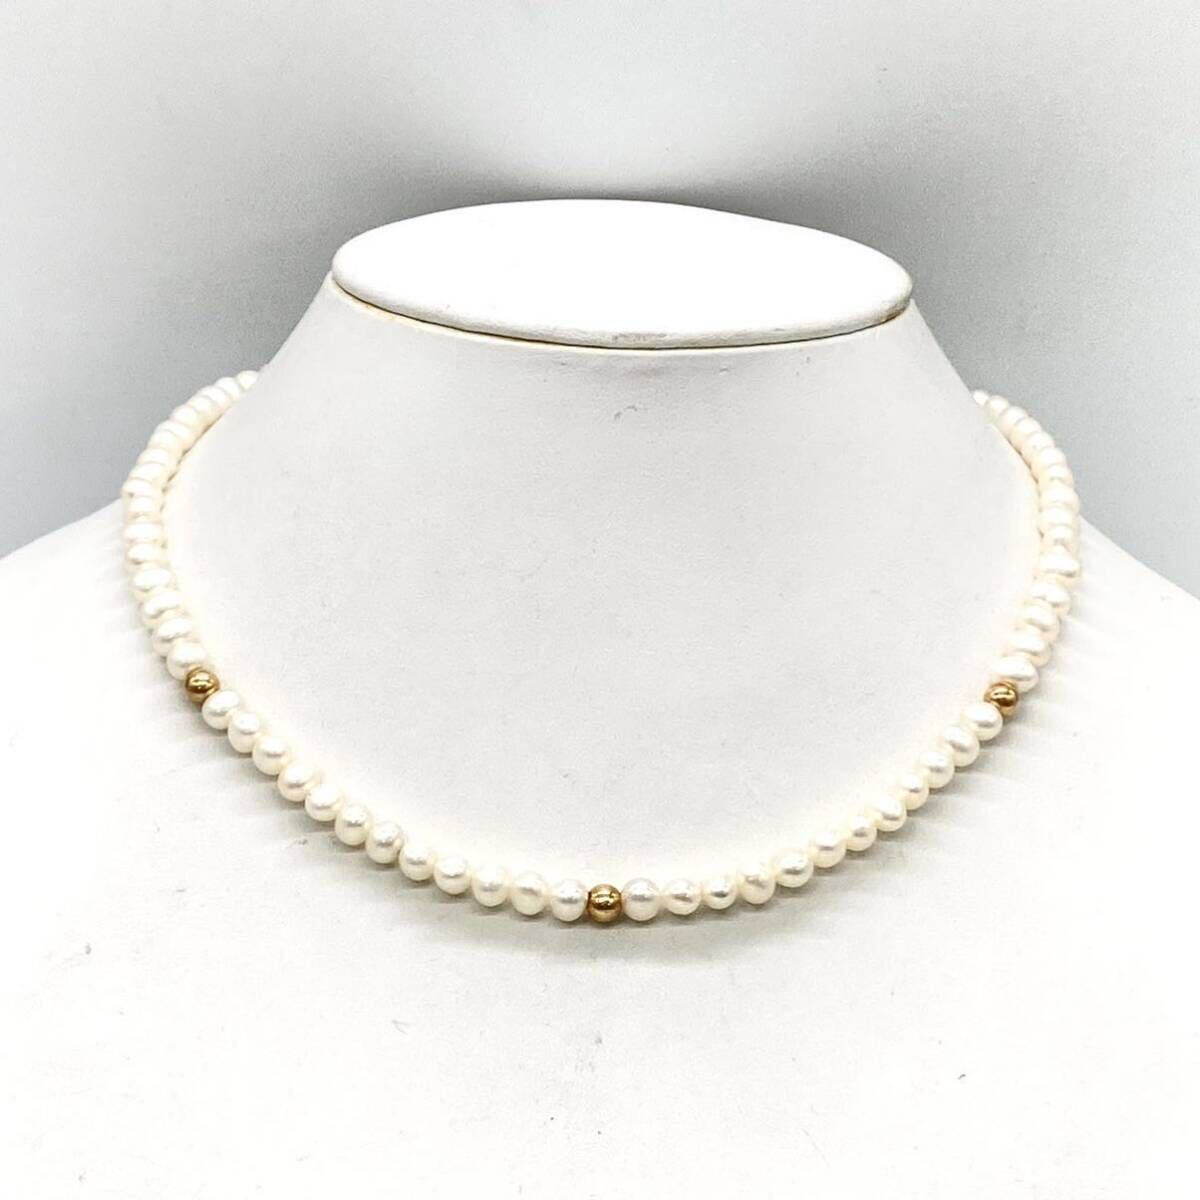 ■K14本真珠ネックレス■a約19.5g 真珠 淡水 ベビー pearl Pearl ネックレス necklace jewelry ジュエリー シルバー silver DB5の画像1